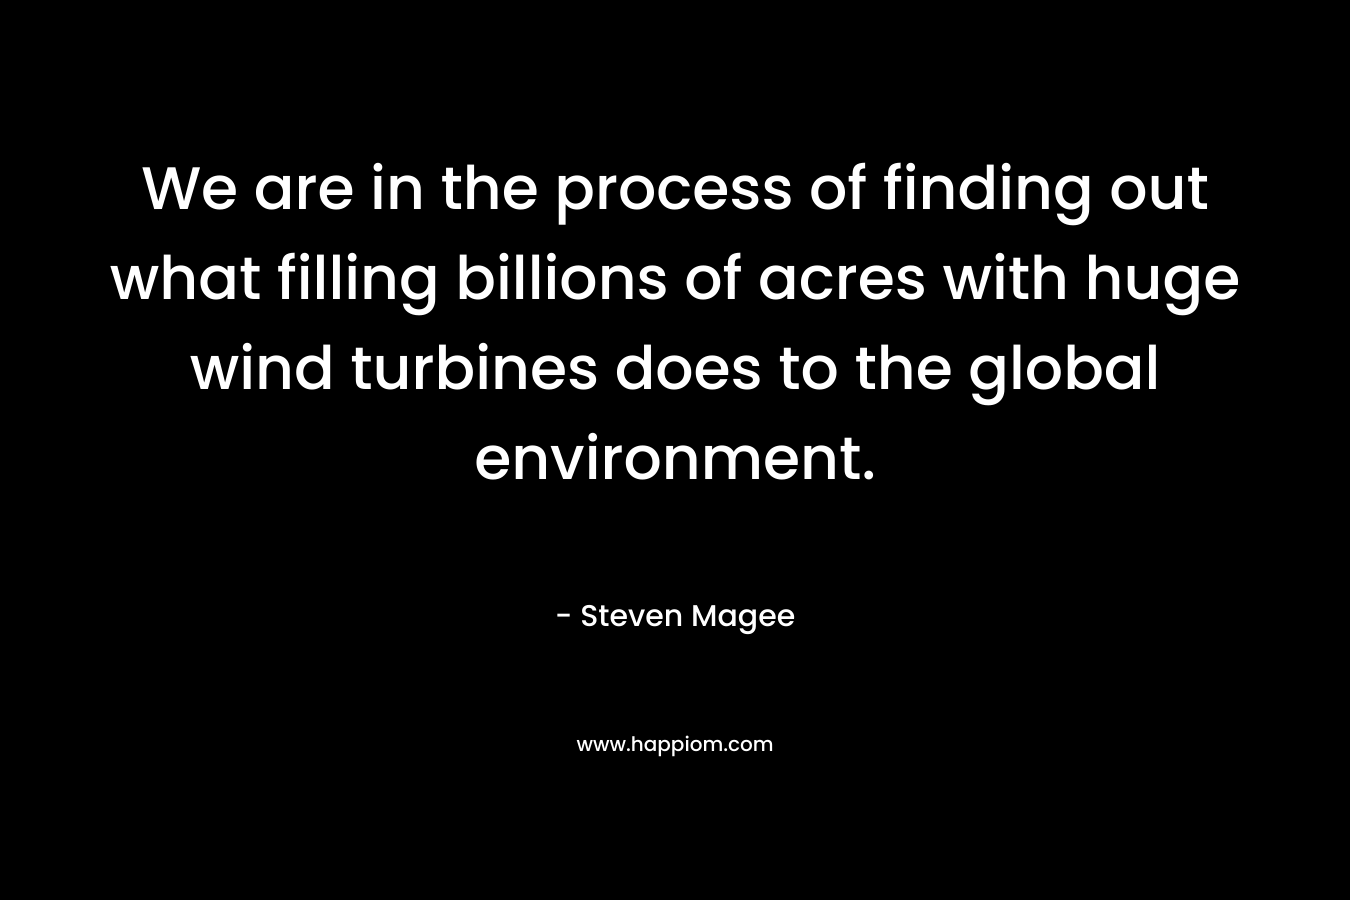 We are in the process of finding out what filling billions of acres with huge wind turbines does to the global environment.